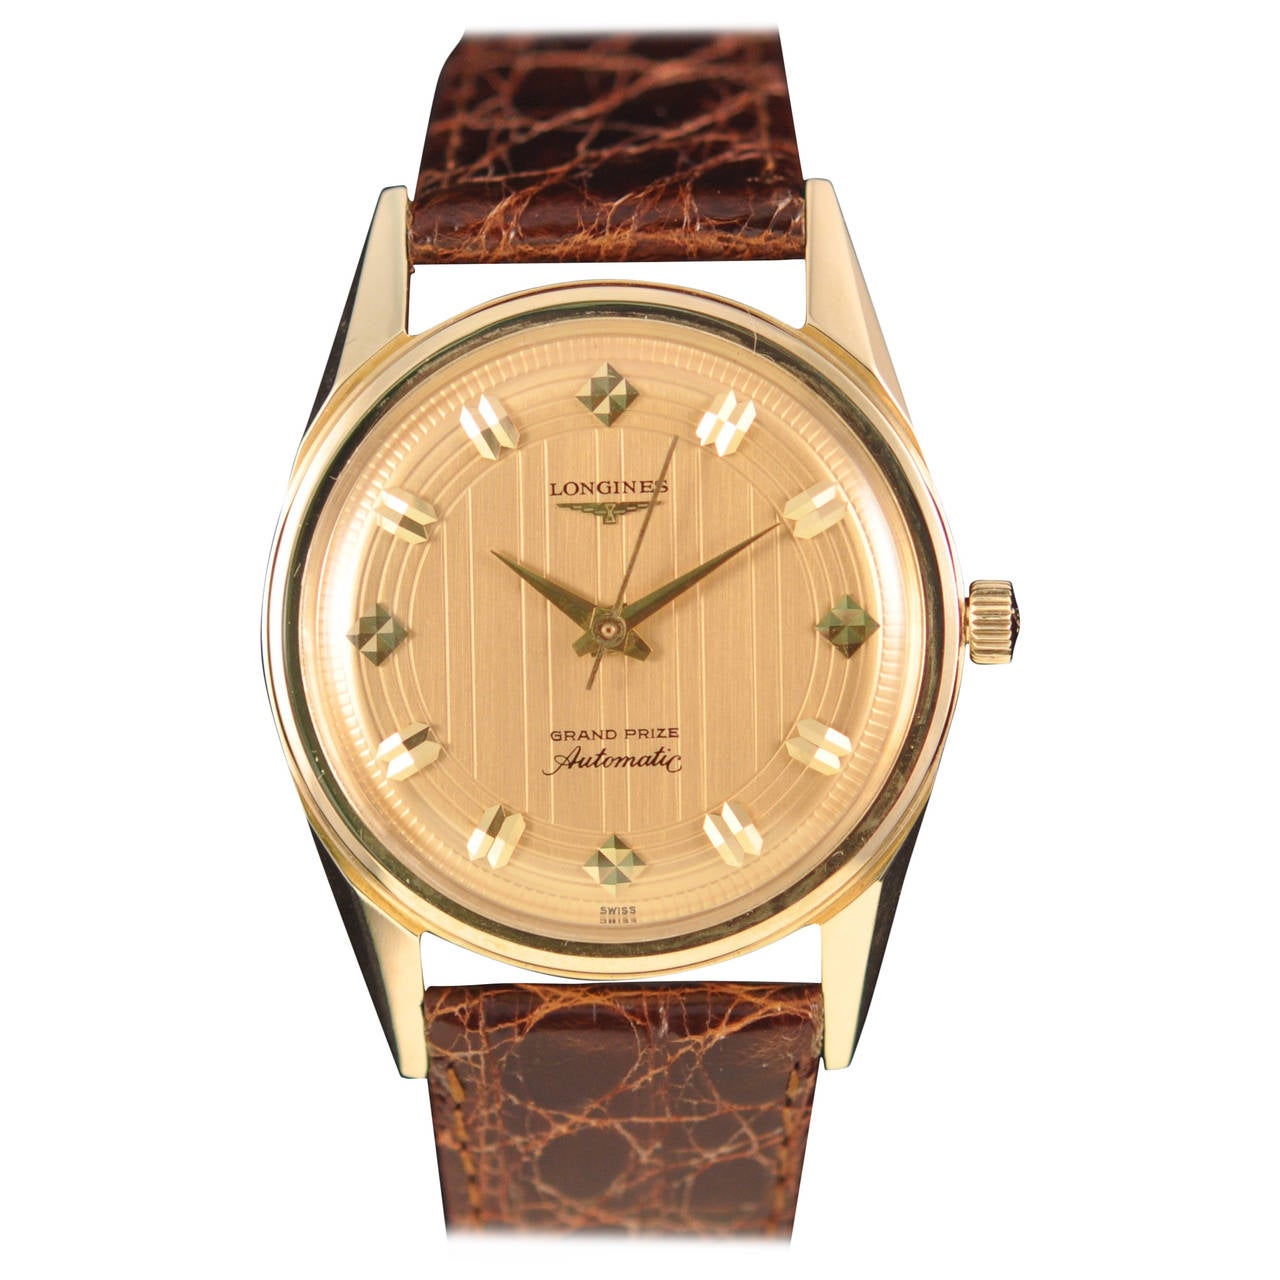 Longines Rose Gold Grand Prize Automatic Wristwatch For Sale